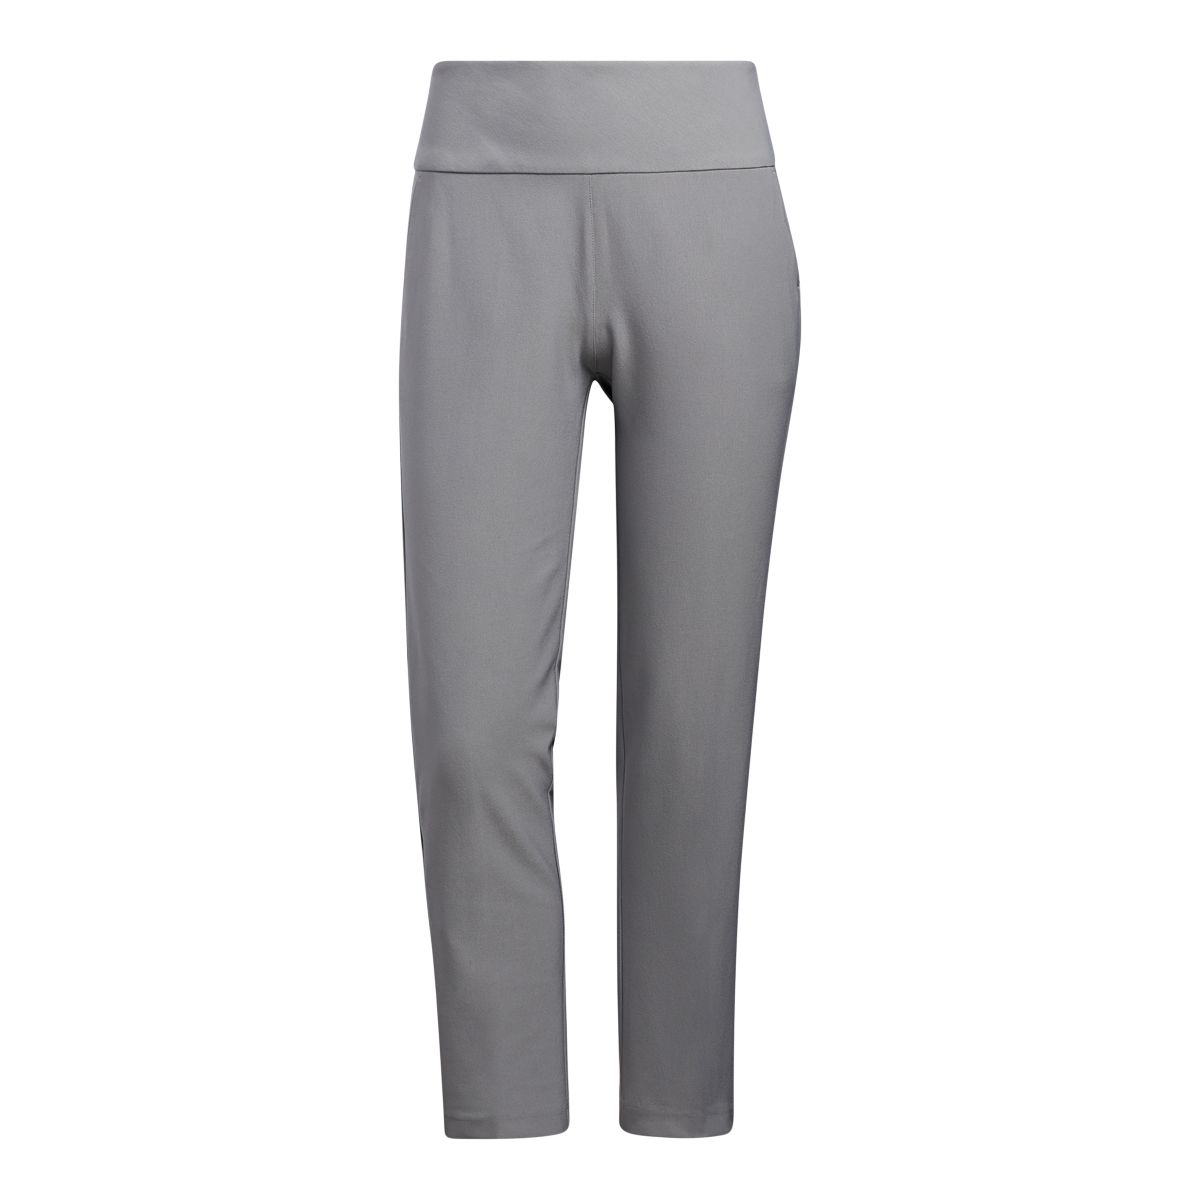 adidas Golf Women's Pull On Ankle Pants